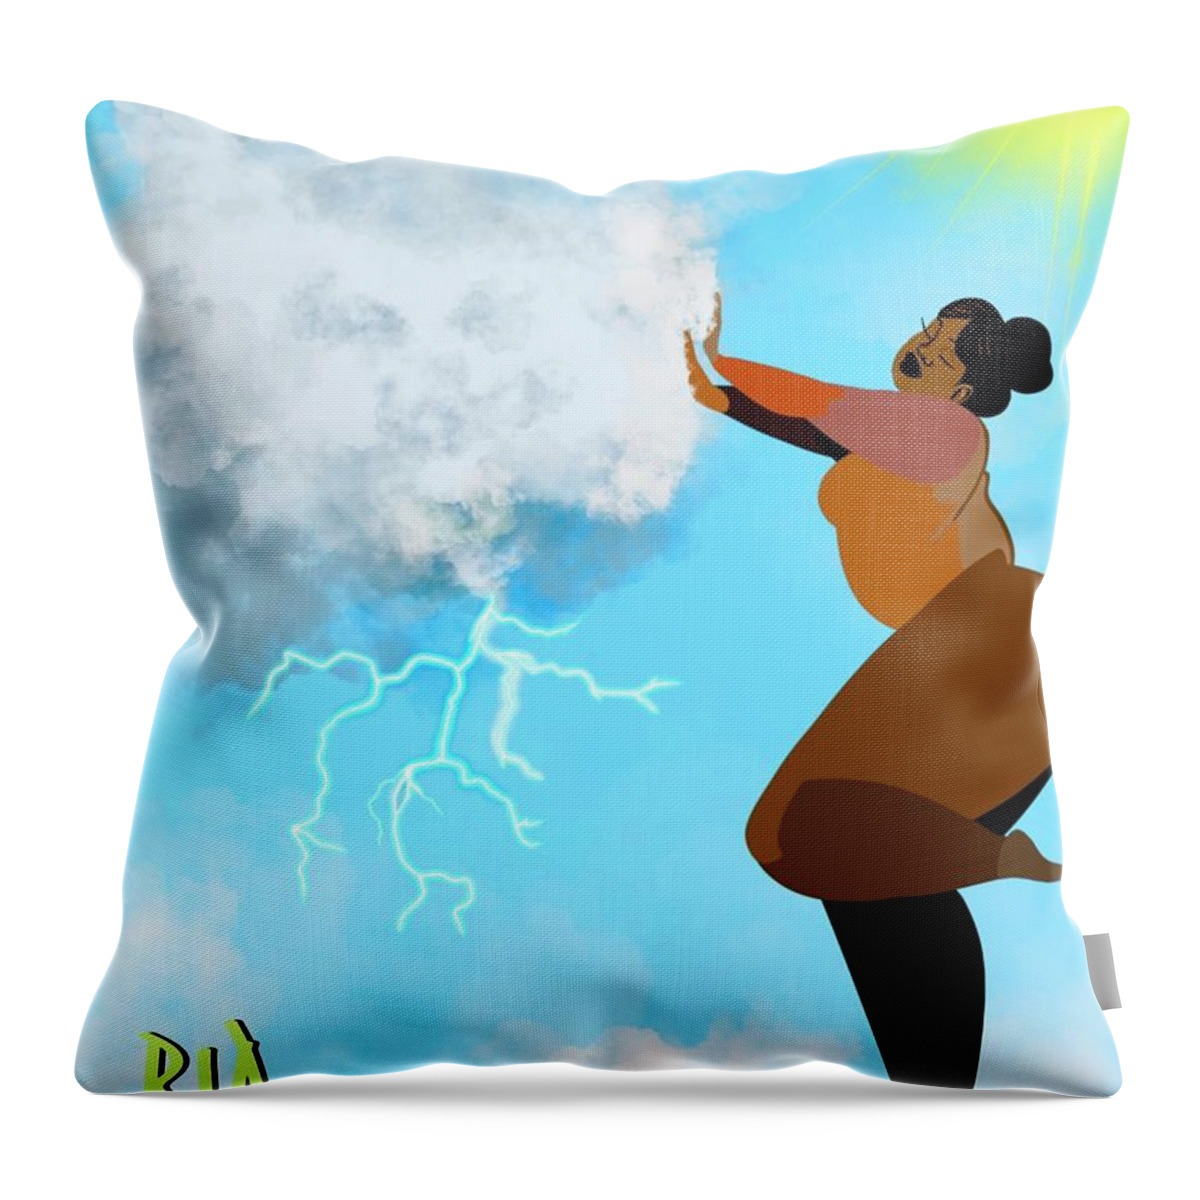 Thick Throw Pillow featuring the digital art Not Today by Artist RiA